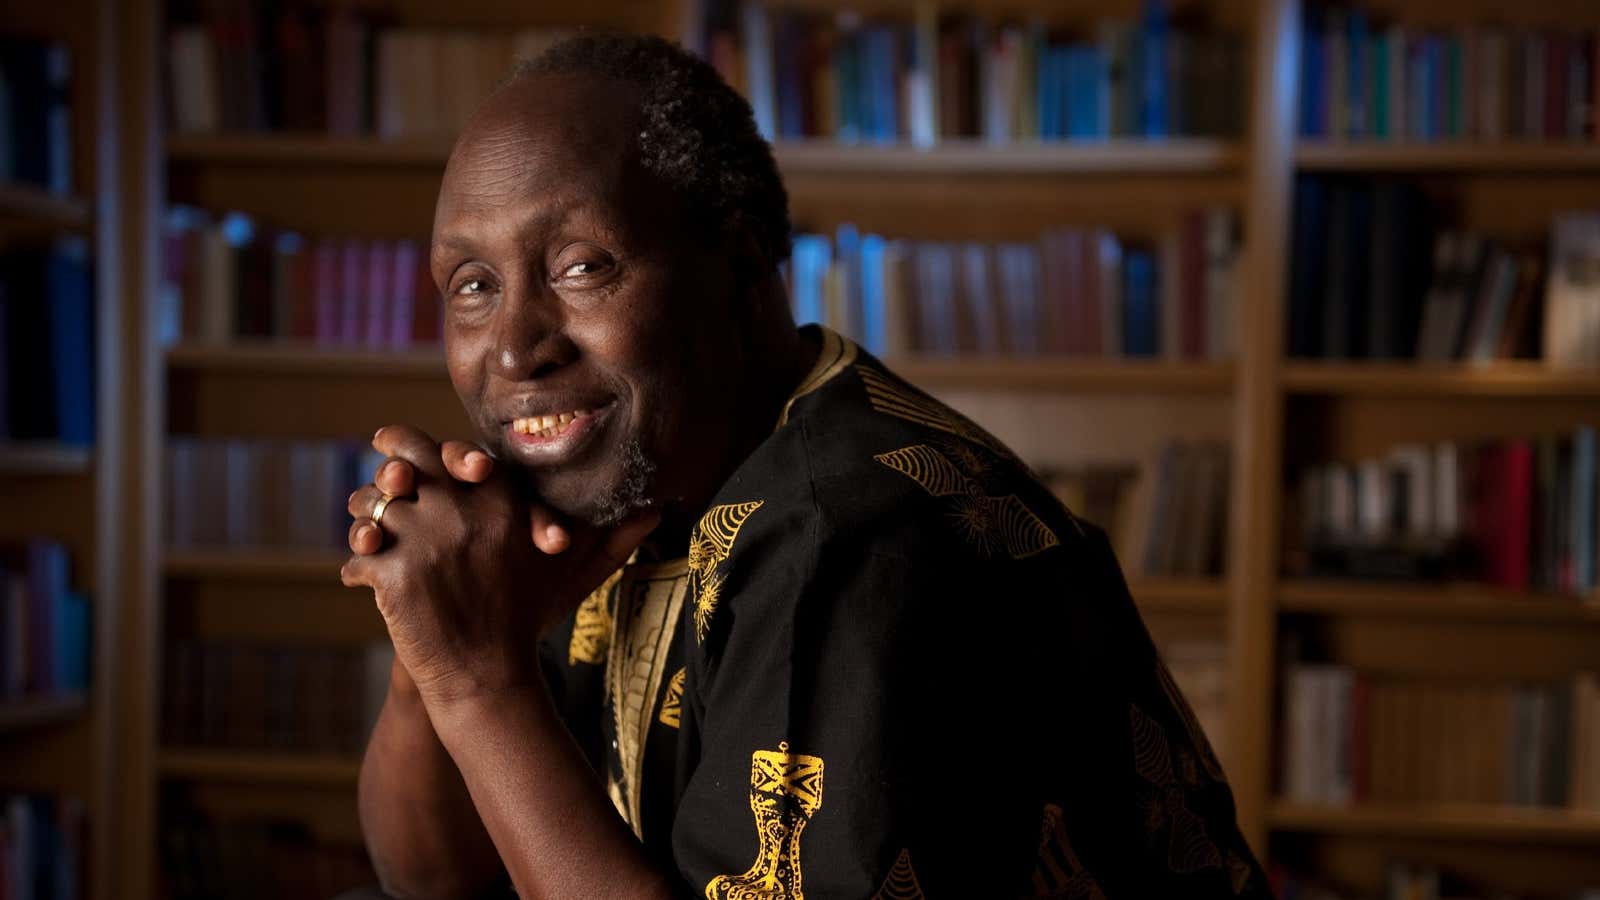 Ngugi Wa Thiongo’s novel, The Perfect Nine_ The Epic of Gĩkũyũ and Mũmbi, has been longlisted for the International Booker Prize.